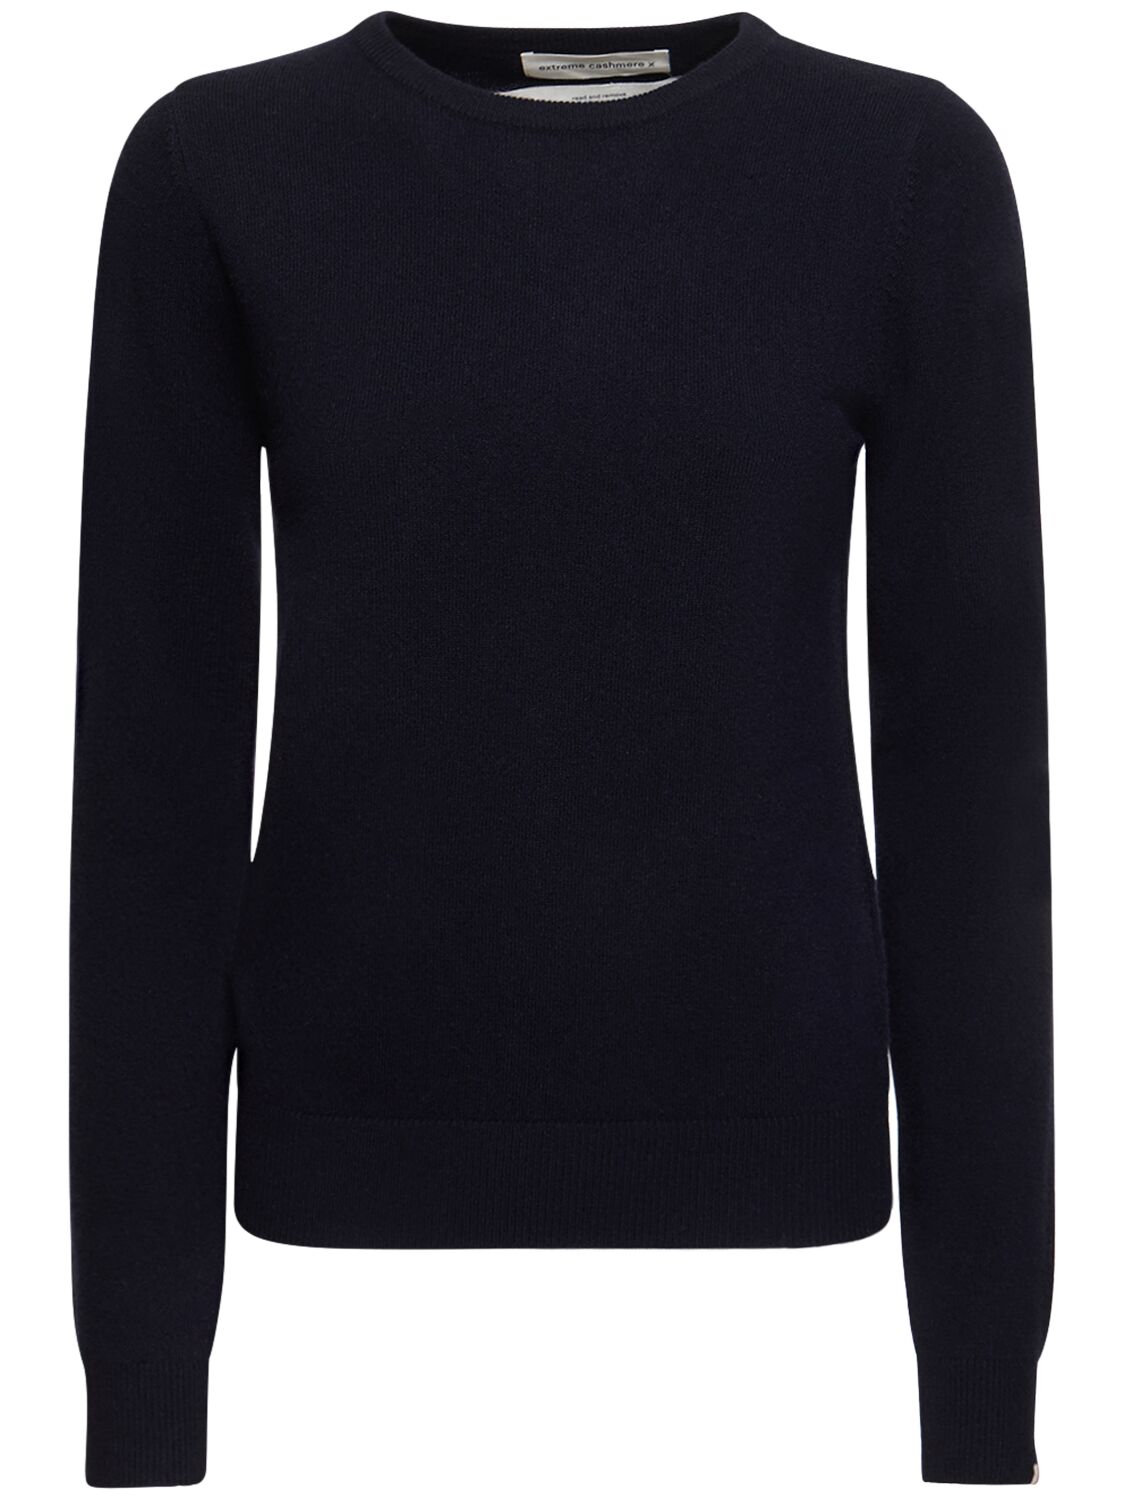 Extreme Cashmere Cashmere Blend Knit Crewneck Sweater In Navy